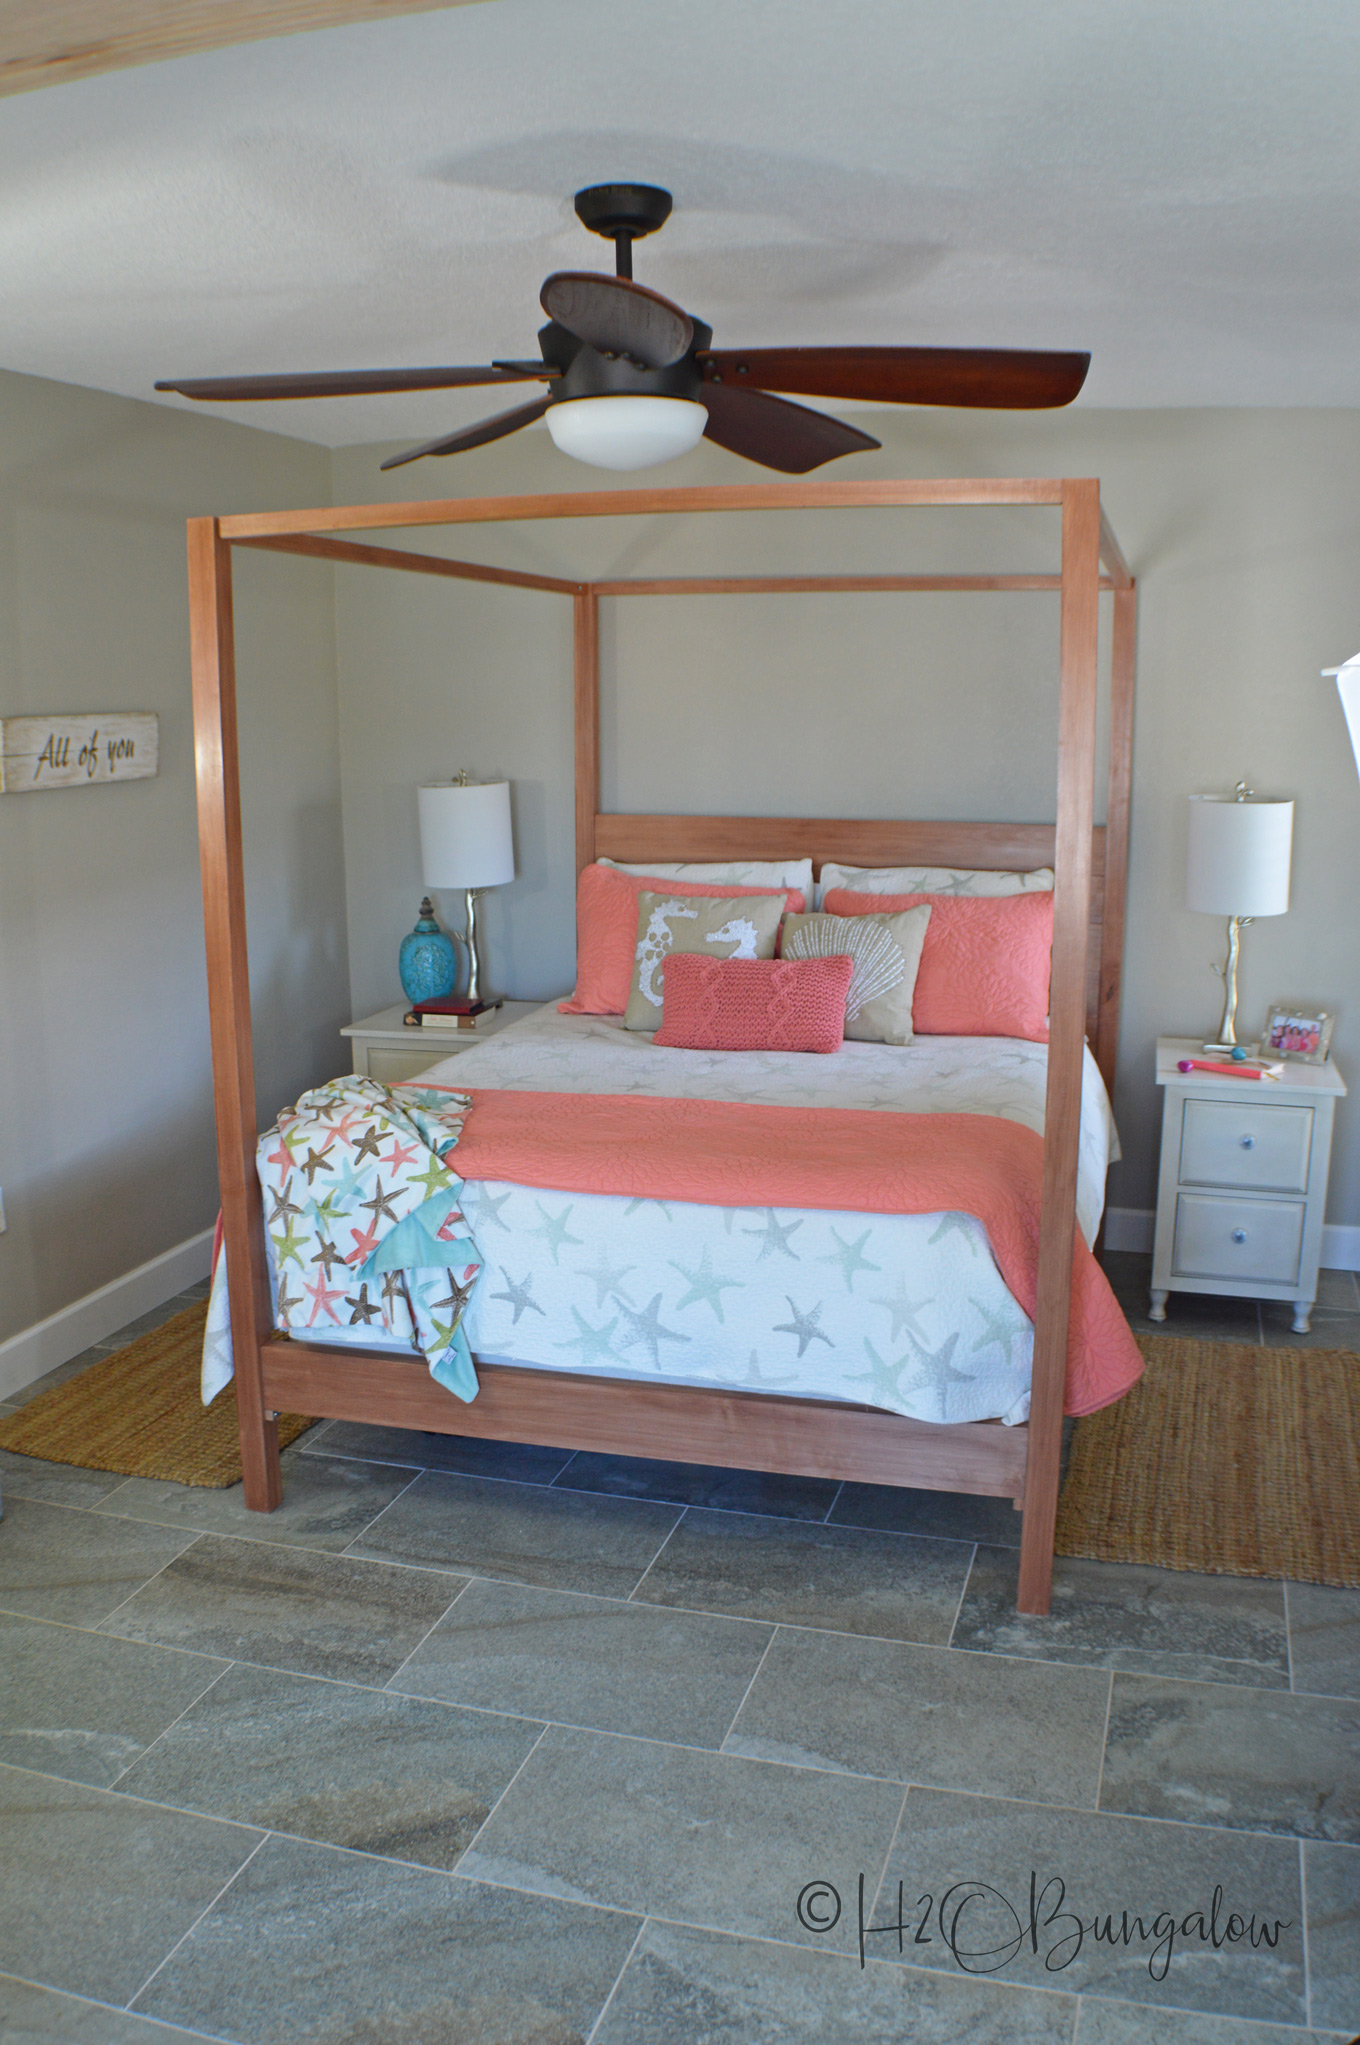 Today, I'm sharing how to makeover a bedroom in three steps. Changing decorating styles can be overwhelming, but when a bedroom makeover is broken into smaller steps it's much easier to achieve the results you want. Use these simple steps and tips on your next bedroom makeover to create the room of your dreams.